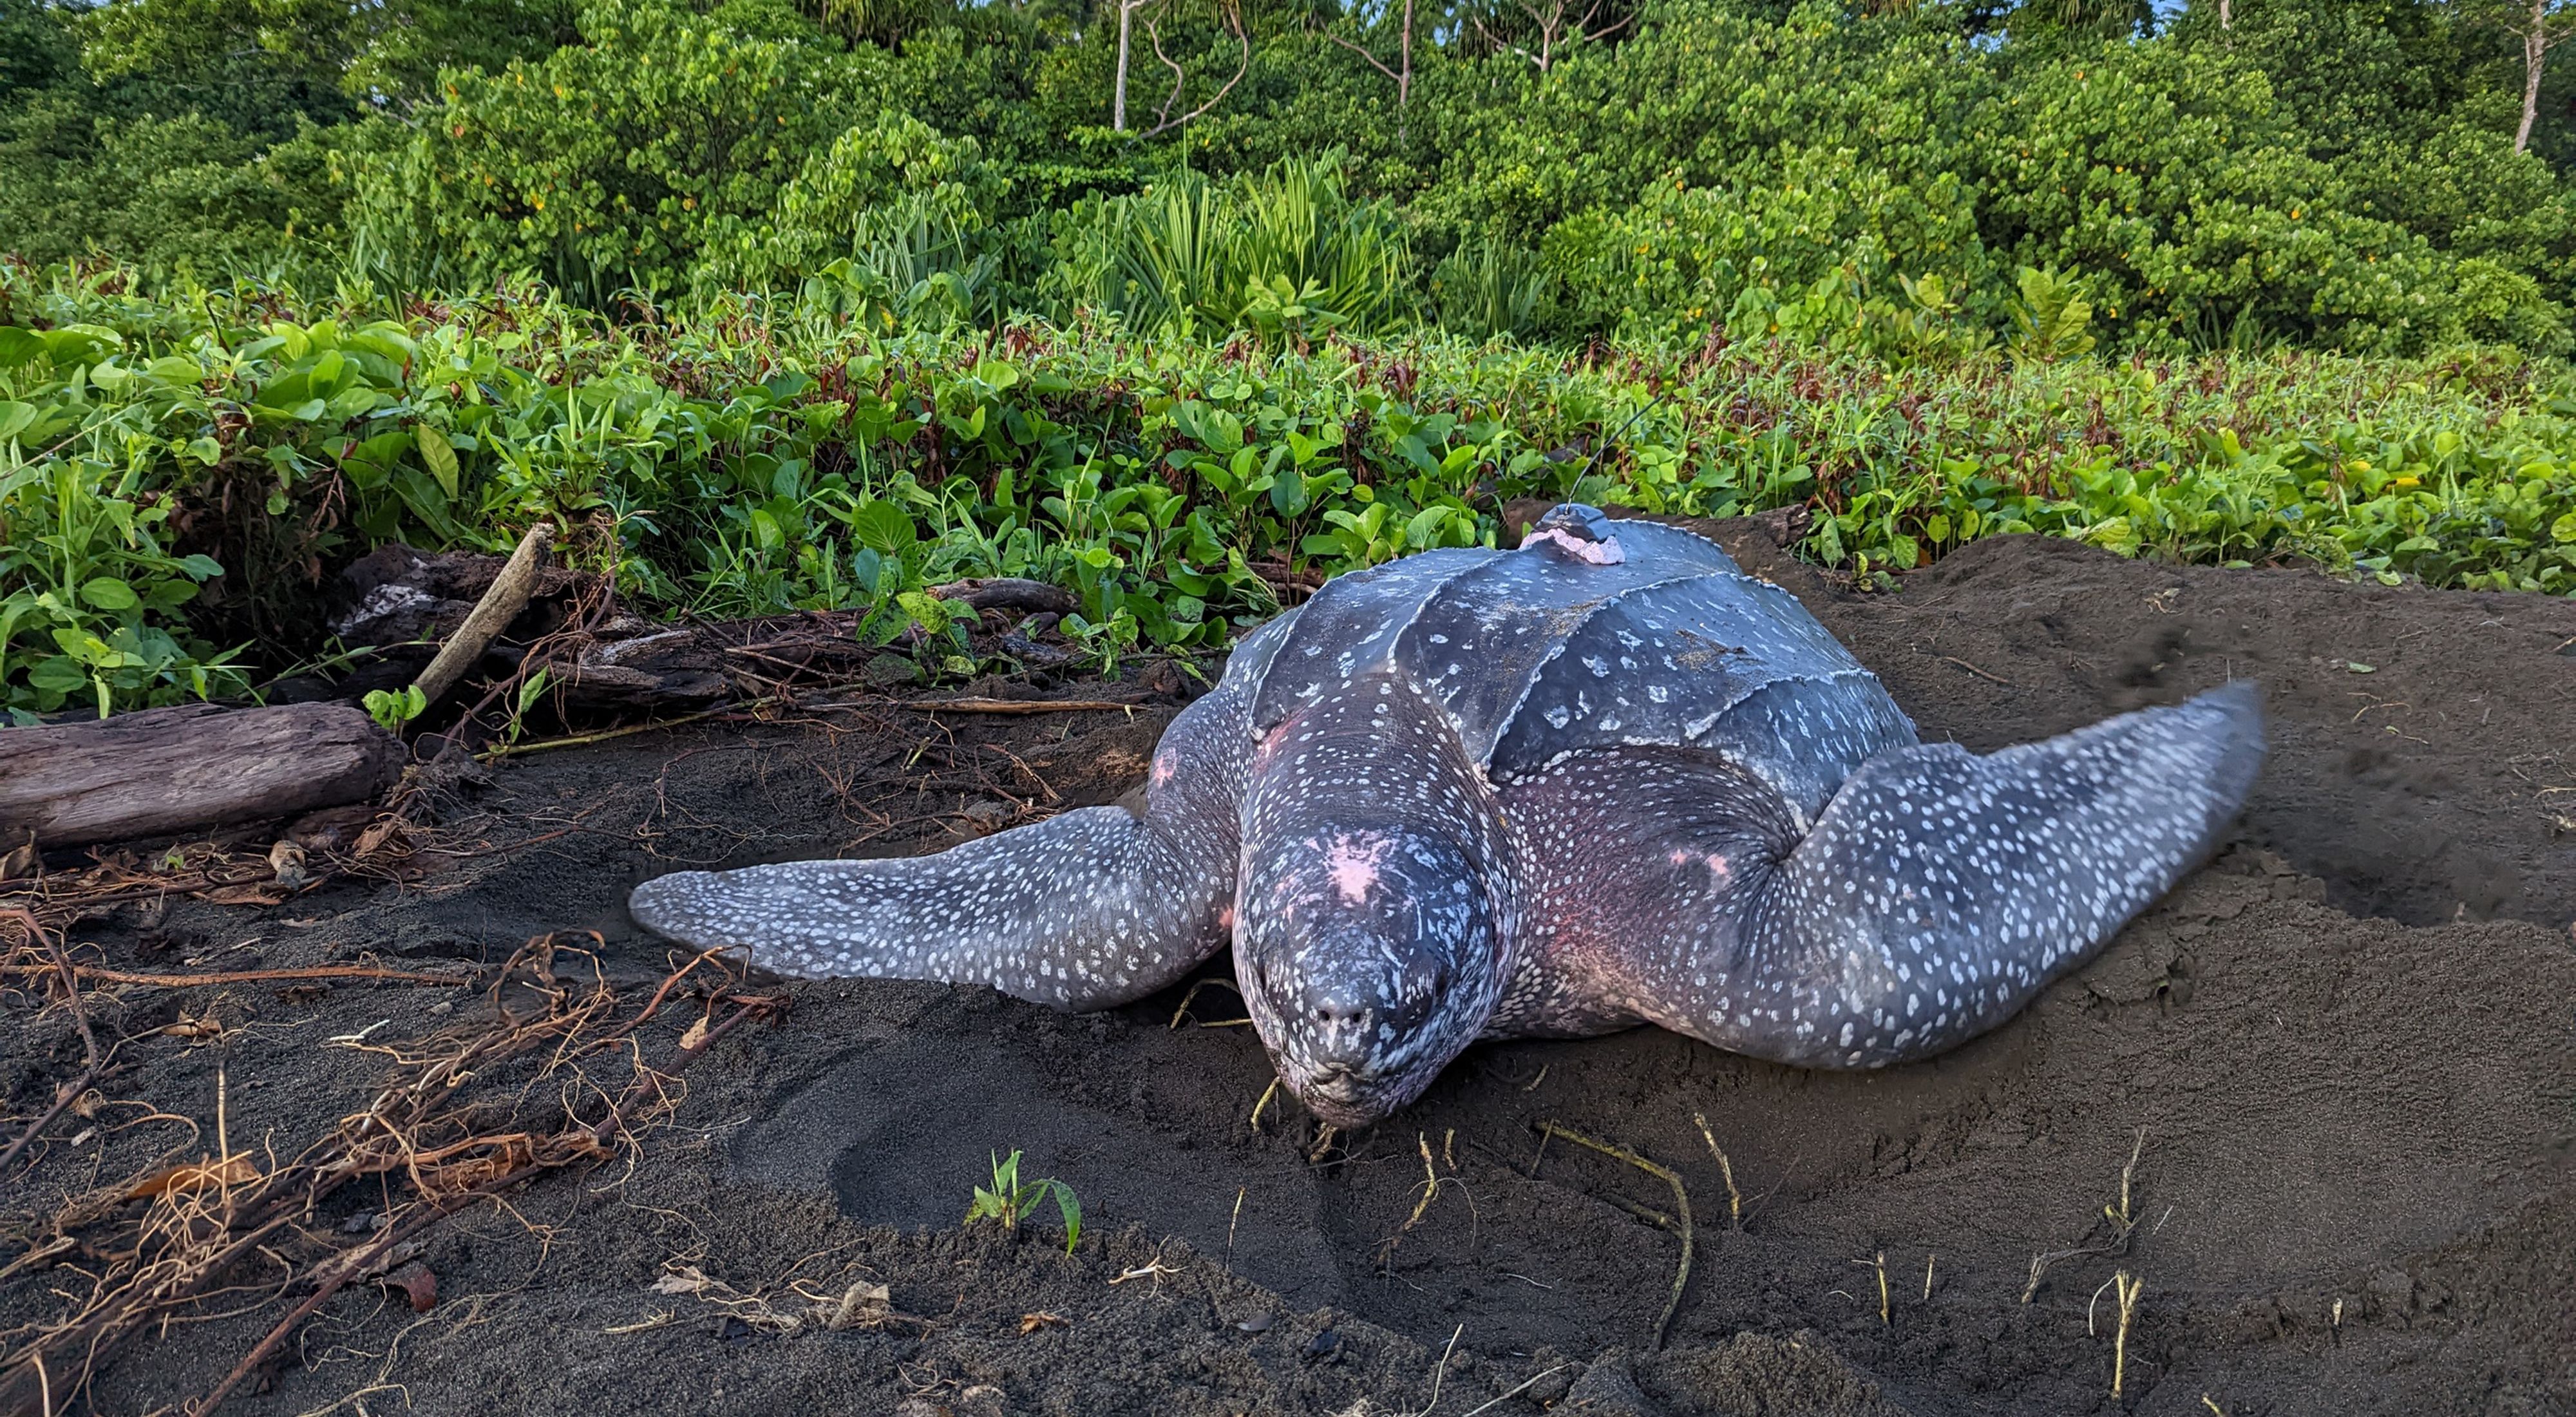 Tagged leatherback on a nesting beach in the Solomon Islands.